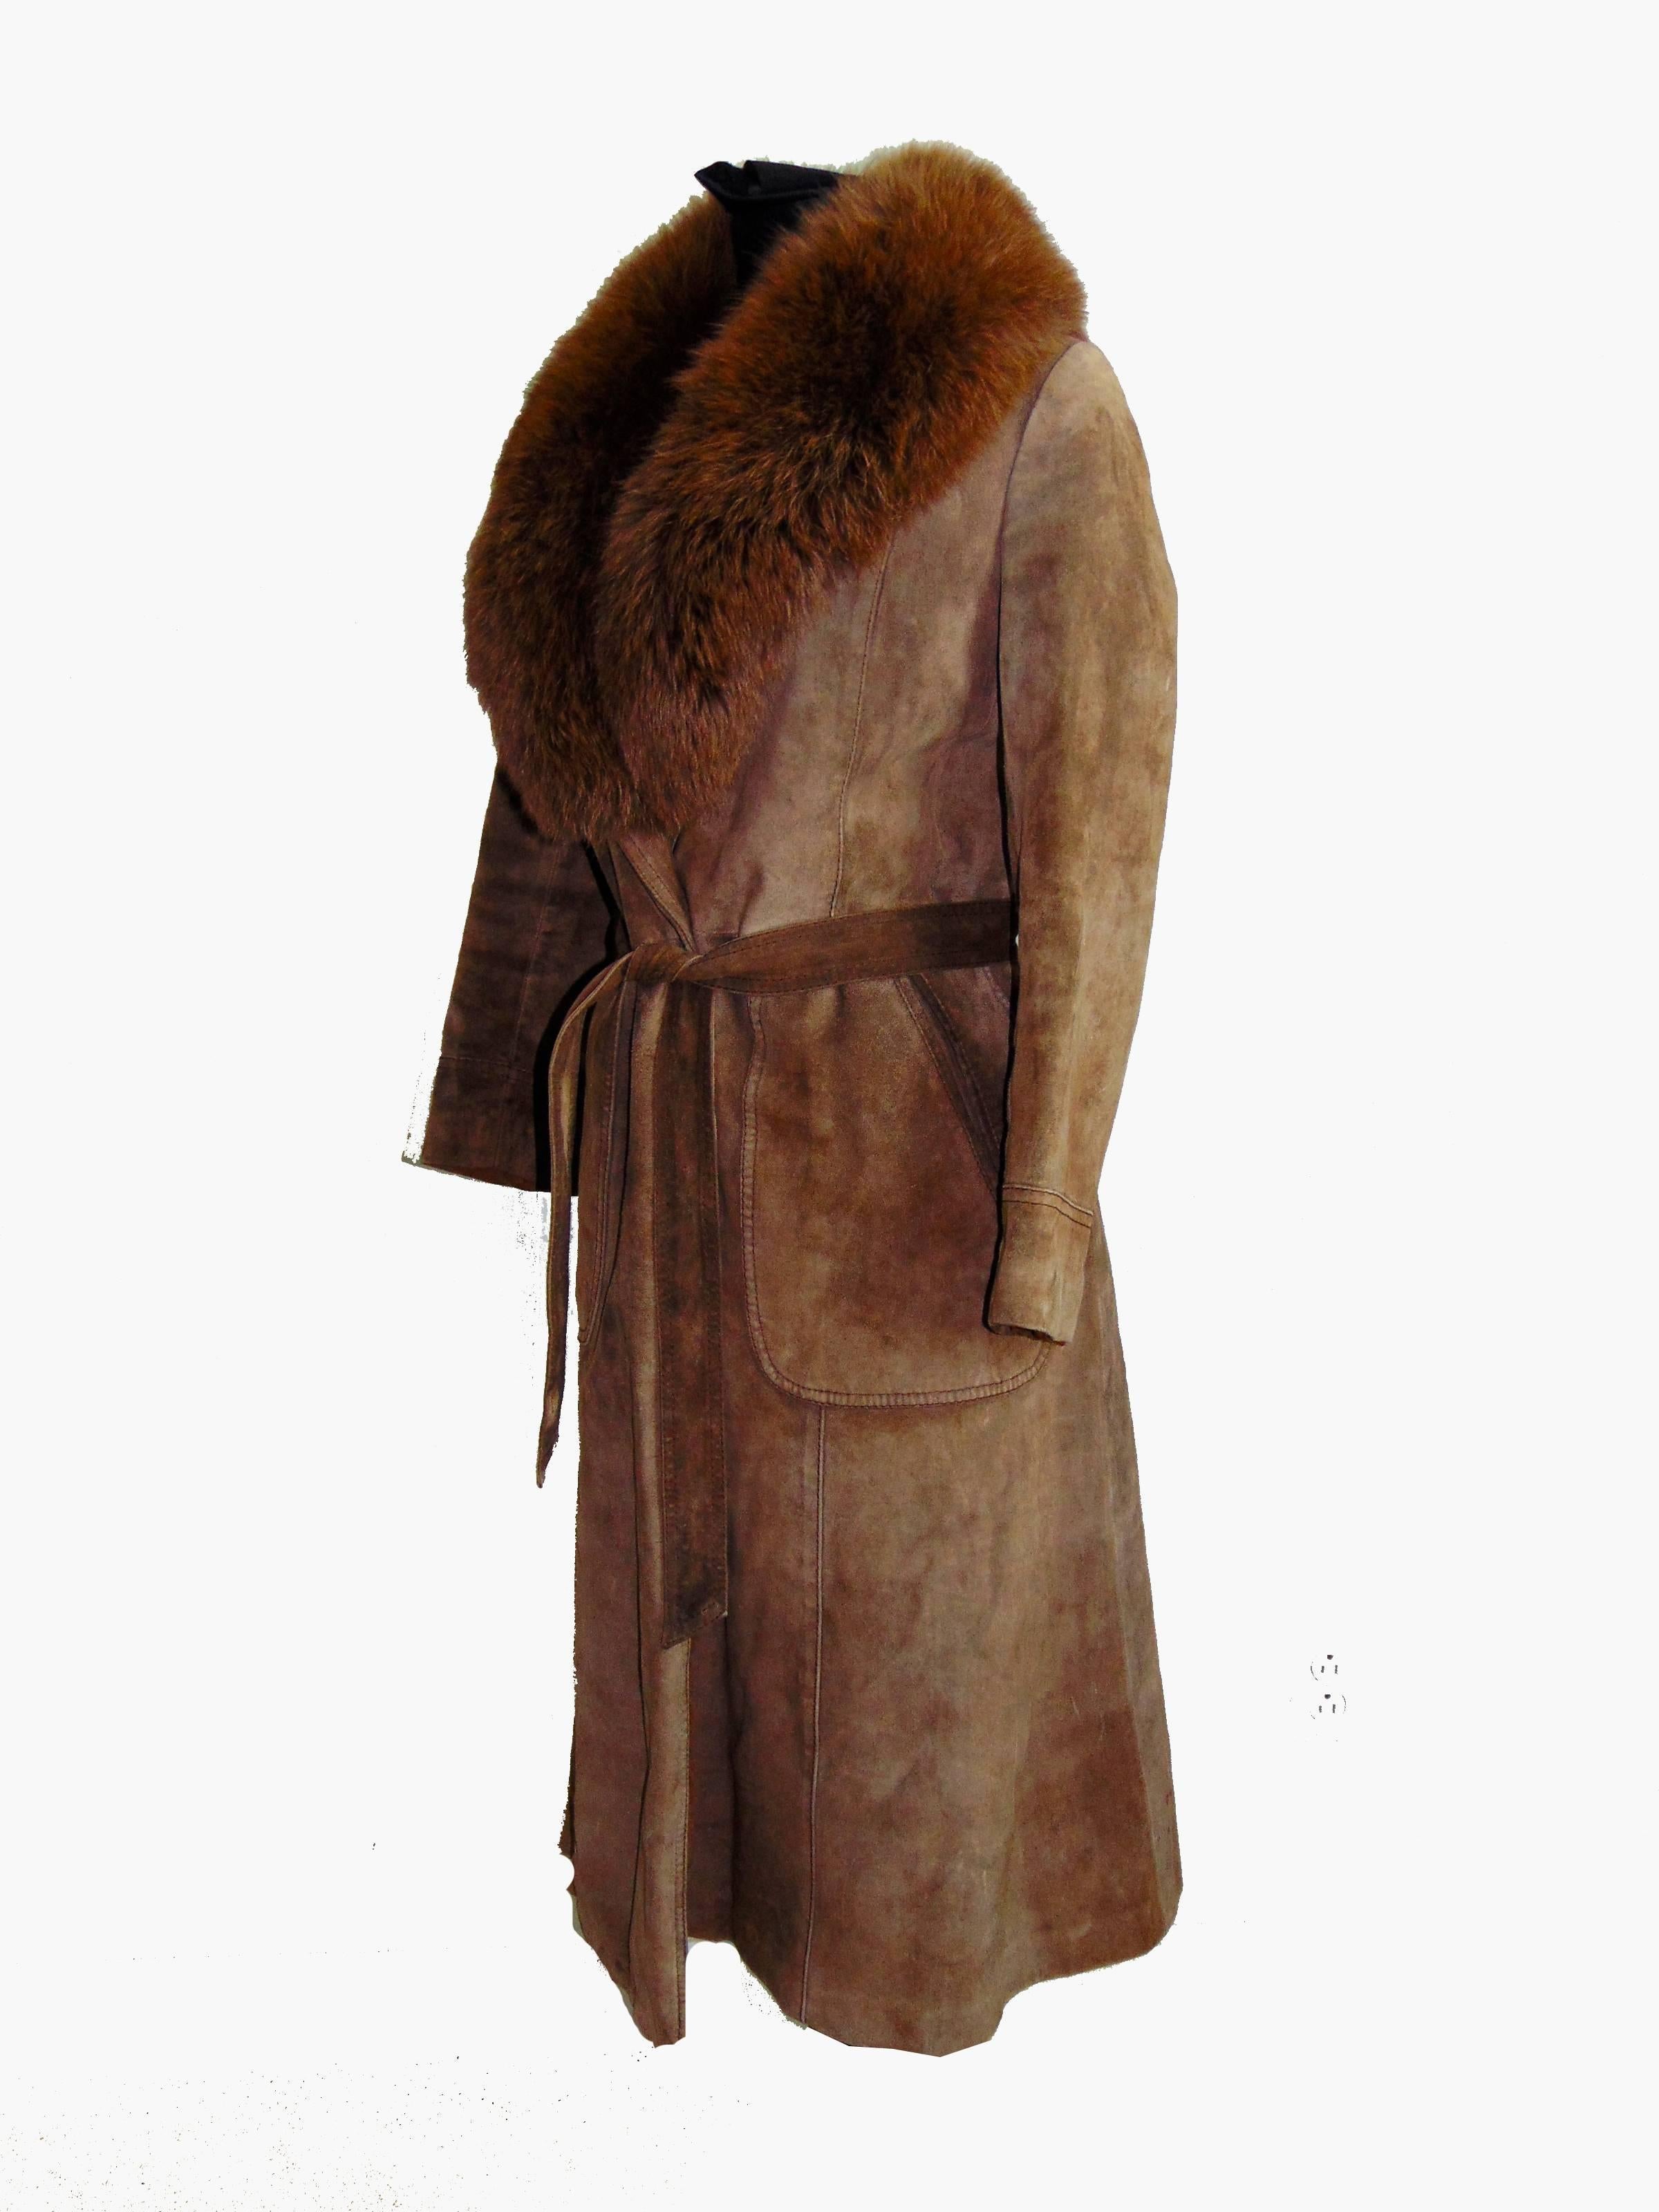 Brown Foxy Suede Leather Coat with Huge Fur Collar by Rafael Italy 1970s Sz 8